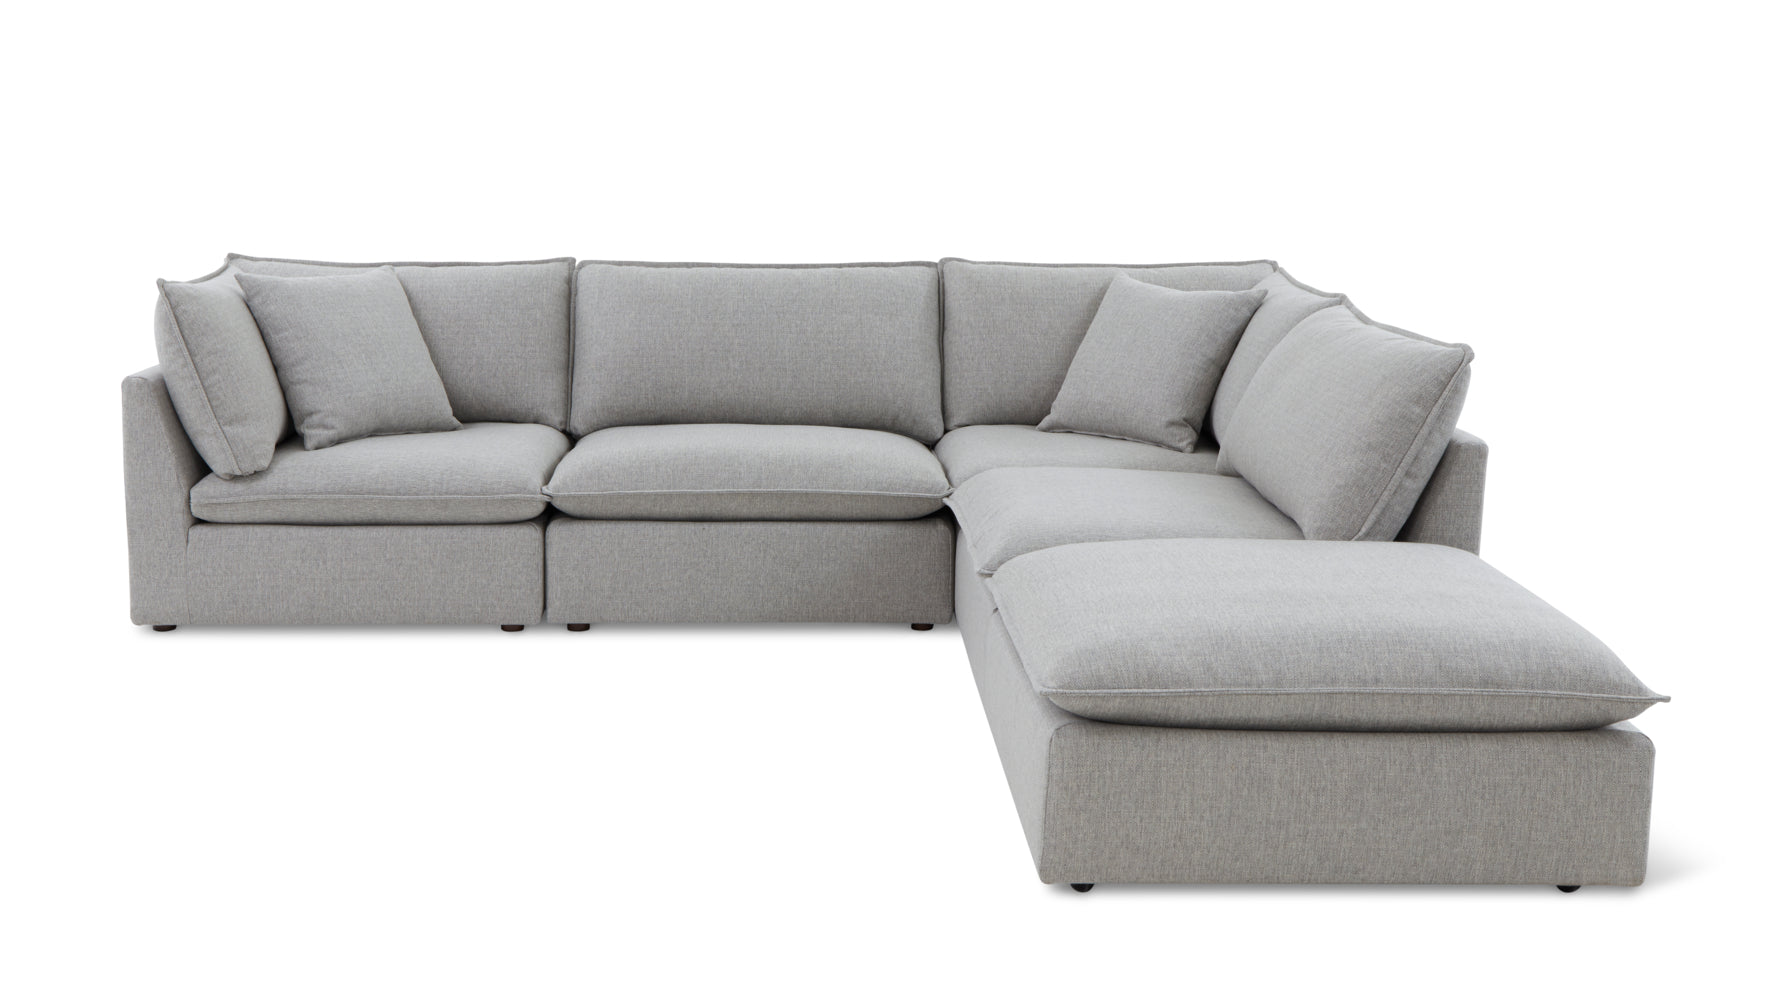 Chill Time 5-Piece Modular Sectional, Heather - Image 1